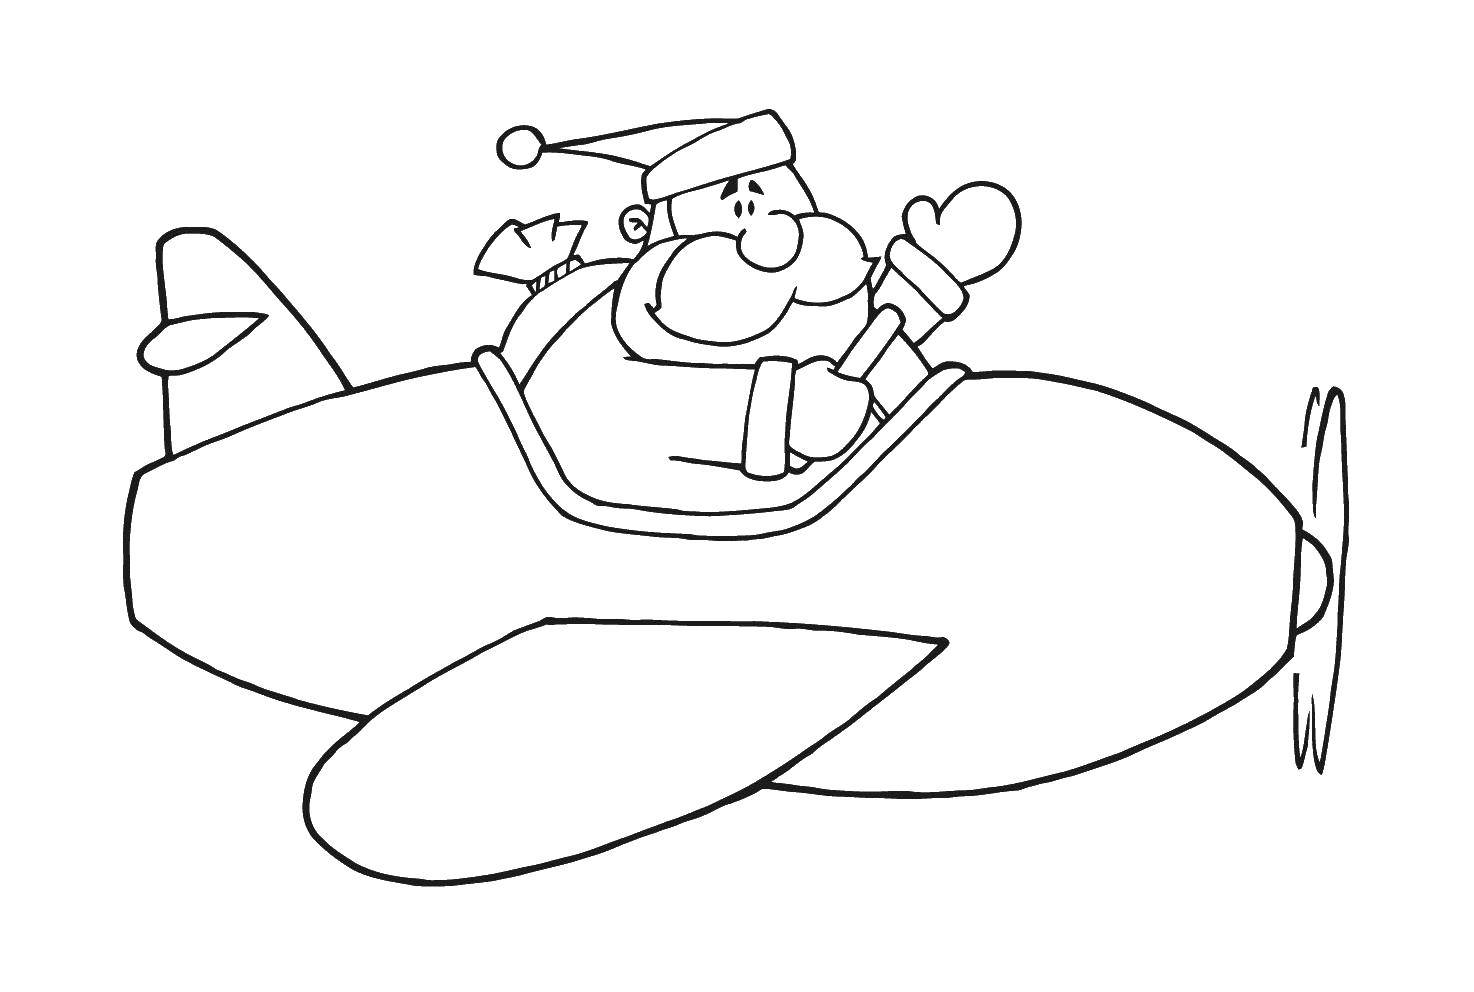 Coloring Santa Claus and the airplane. Category The planes. Tags:  the plane, Santa Claus, bag.